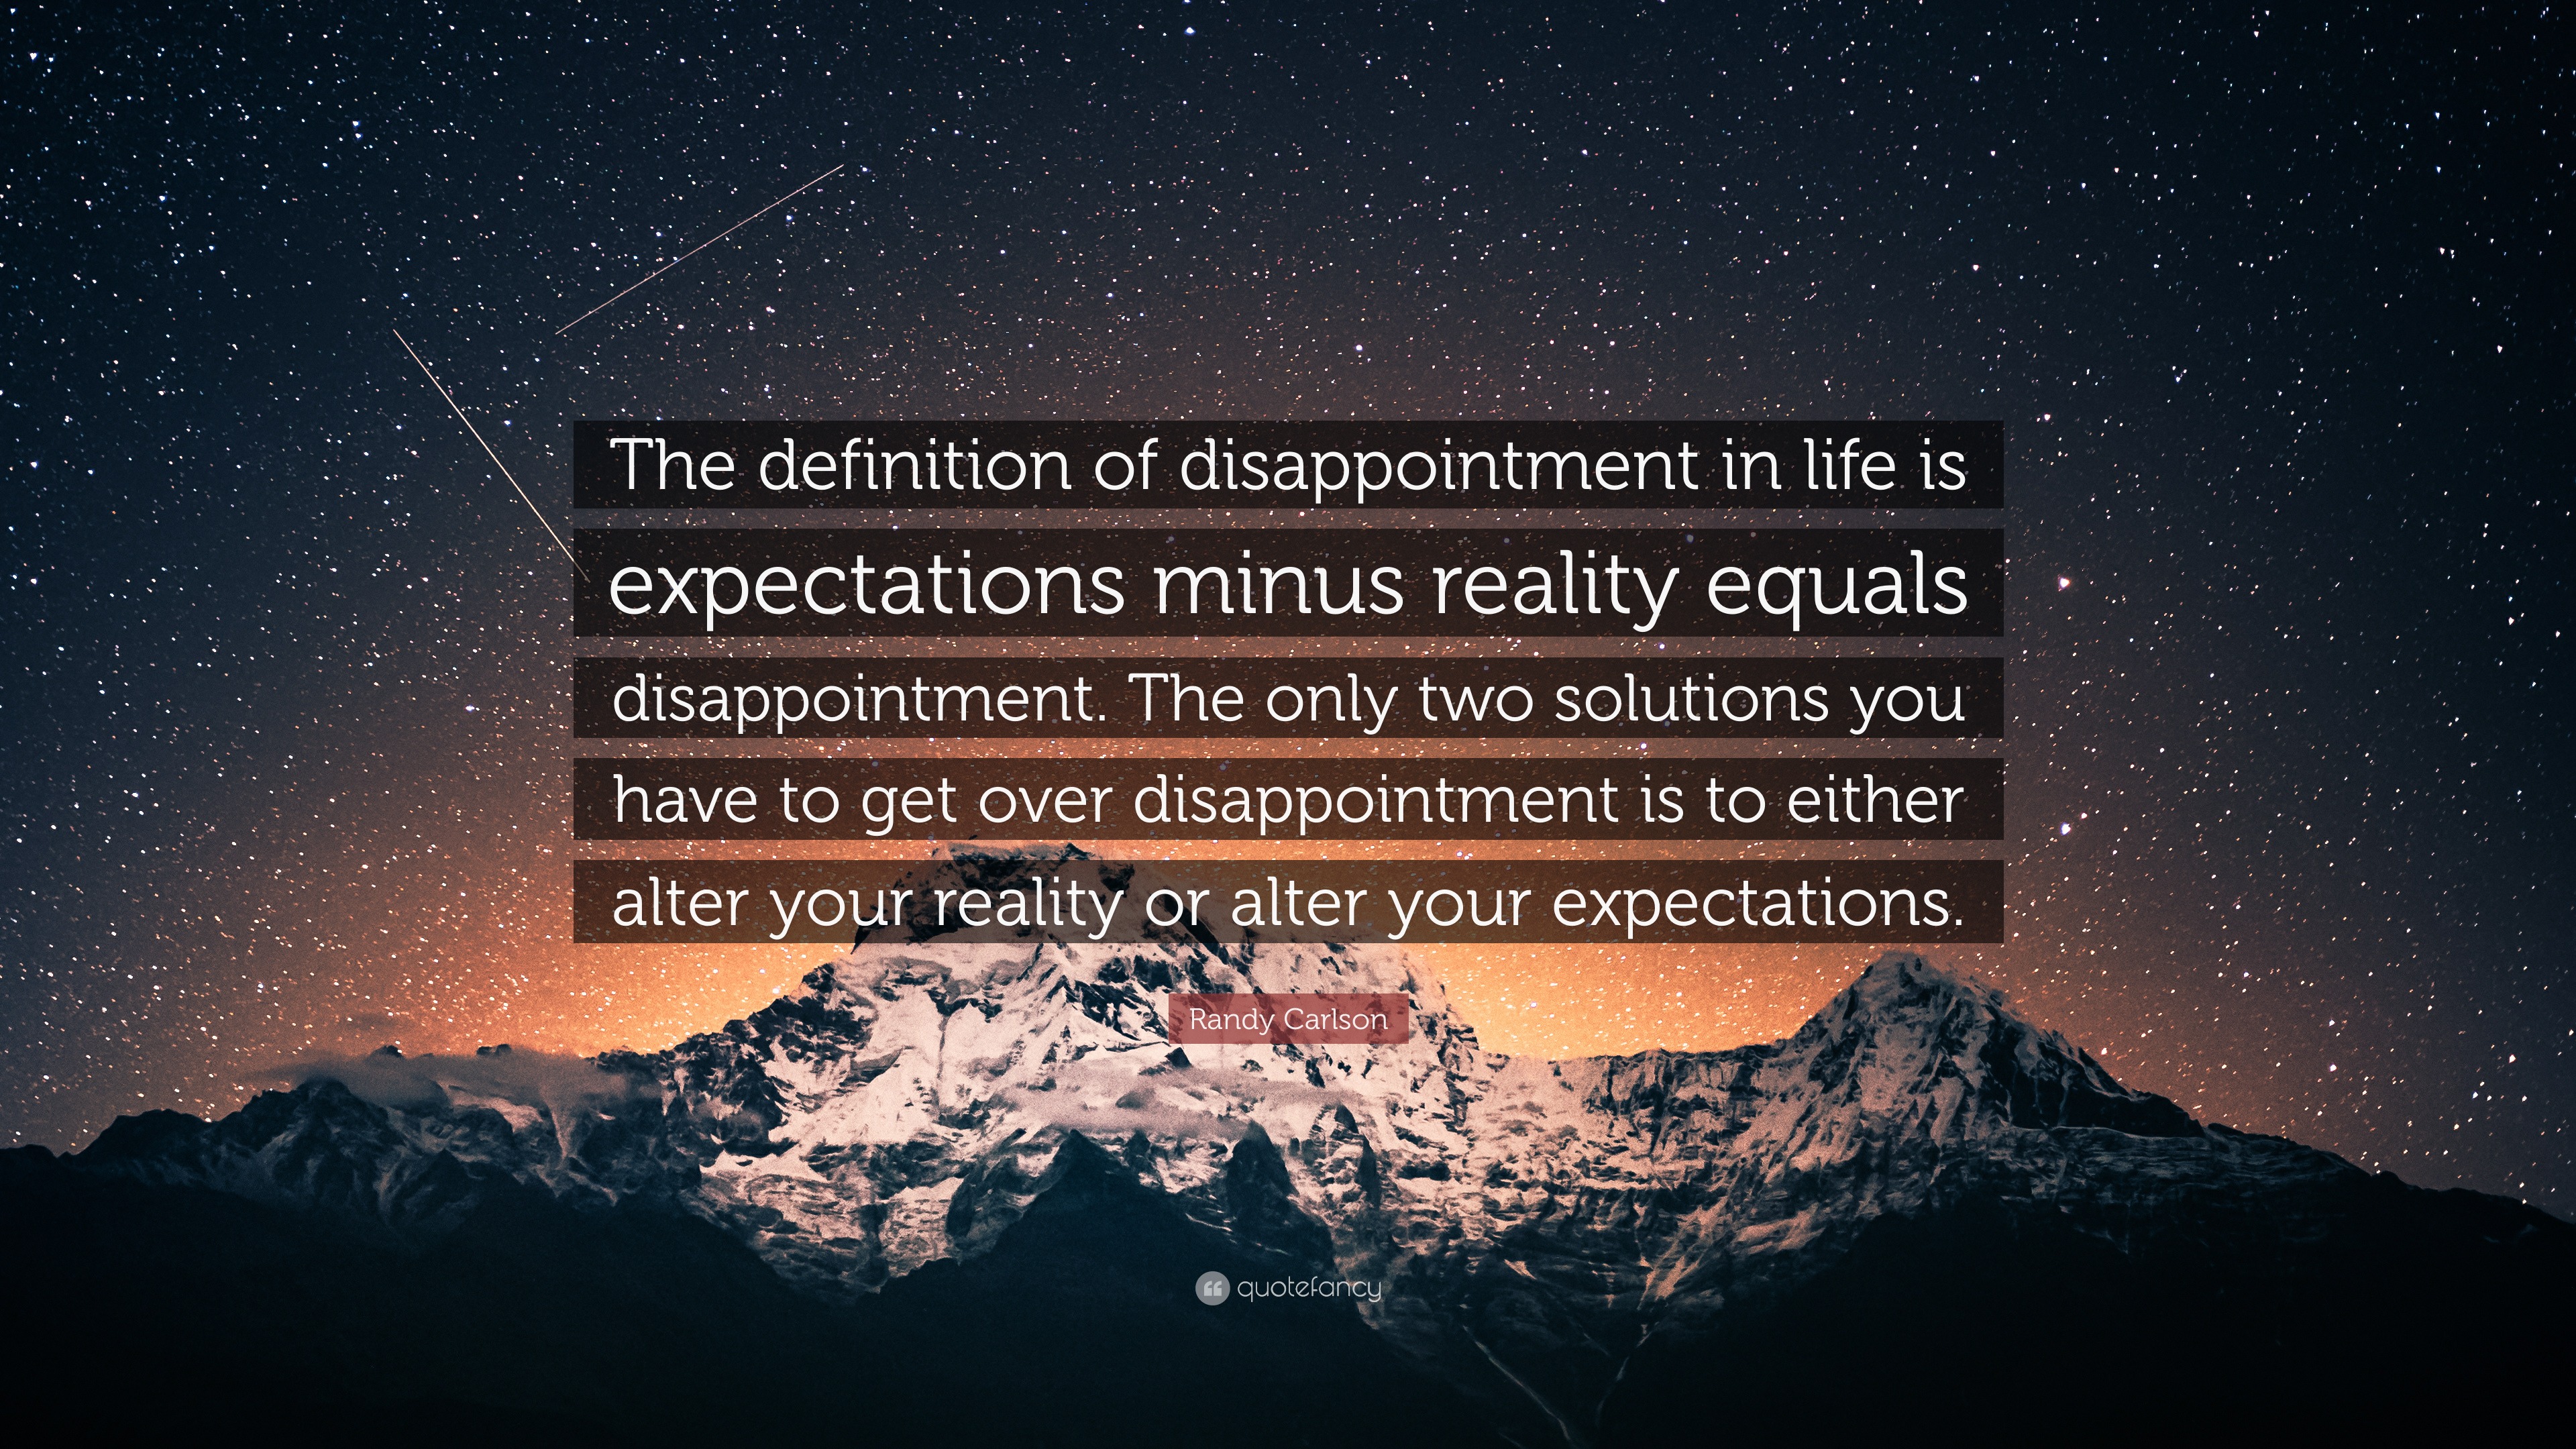 Randy Carlson Quote: “The definition of disappointment in life is